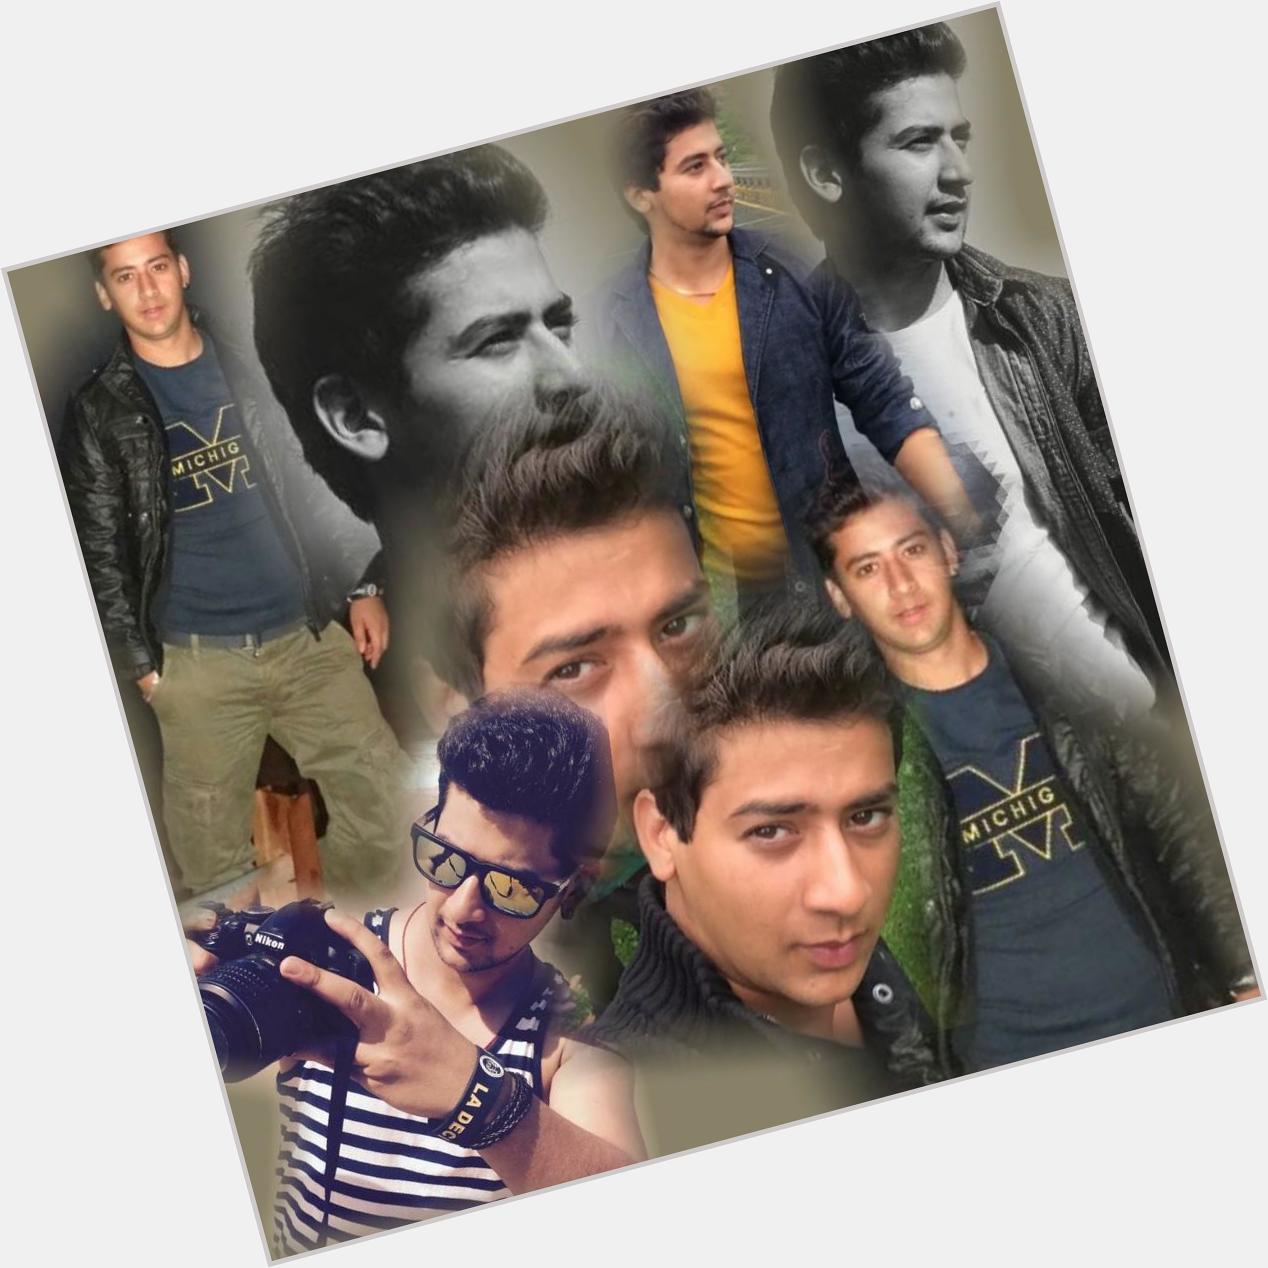 Happy Birthday Paras Arora
Wish u all the best
And God Bless You
Love you Paras 